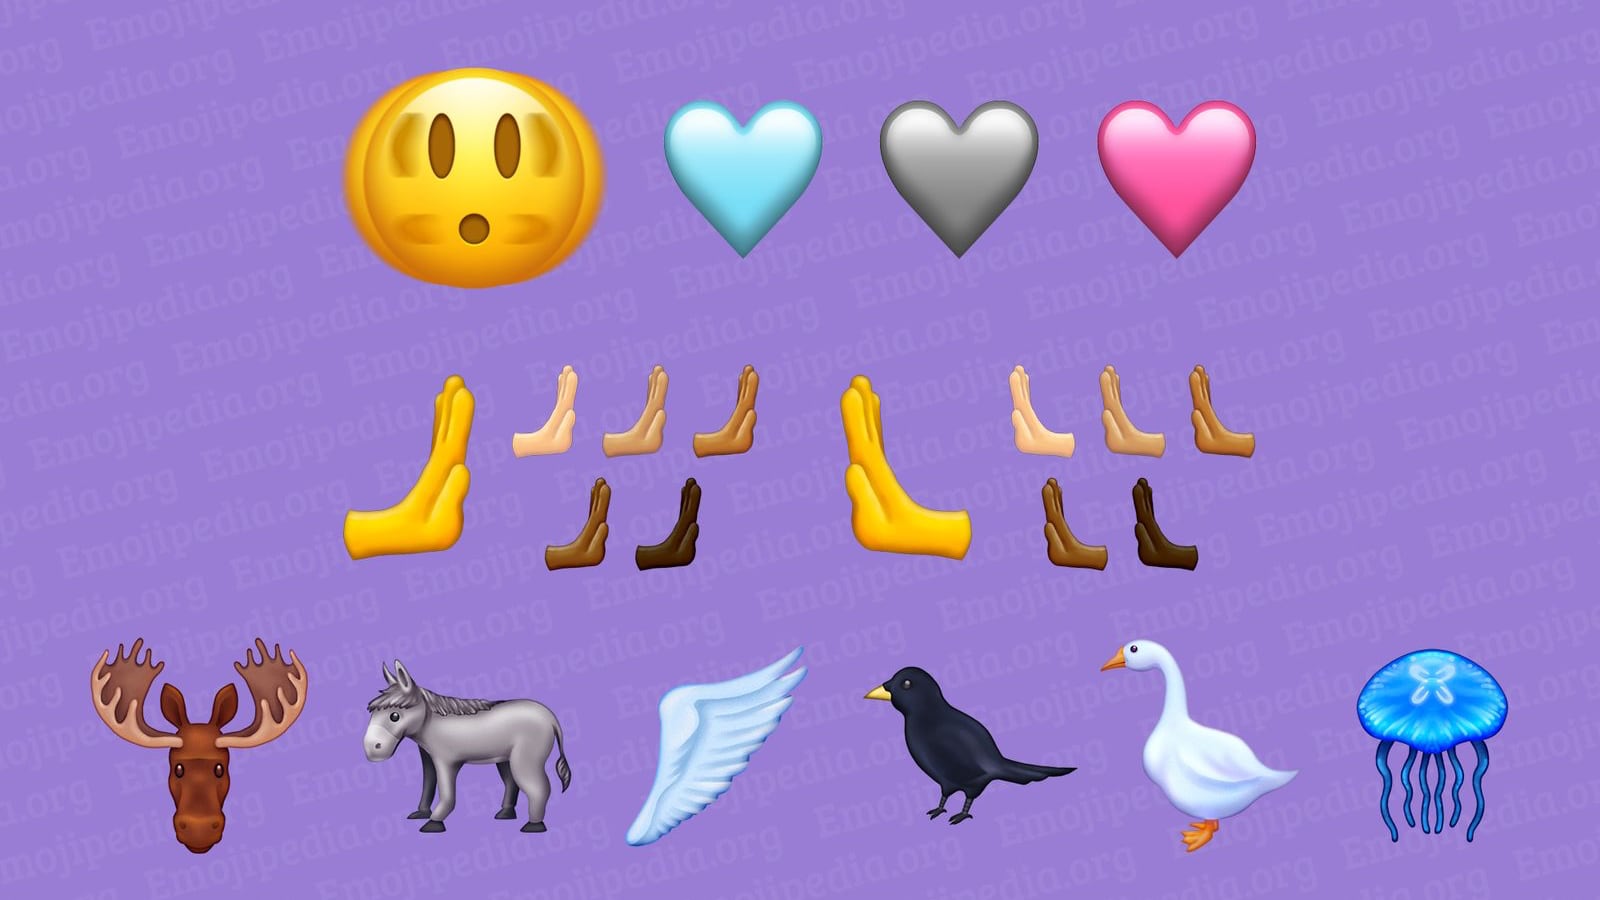 Images of several new emoticons being consider for Emoji 15, including a shaking face, pushing hands, a pink heart, a light-blue heart, a grey heart, a donkey, a moose, a black bird and jellyfish